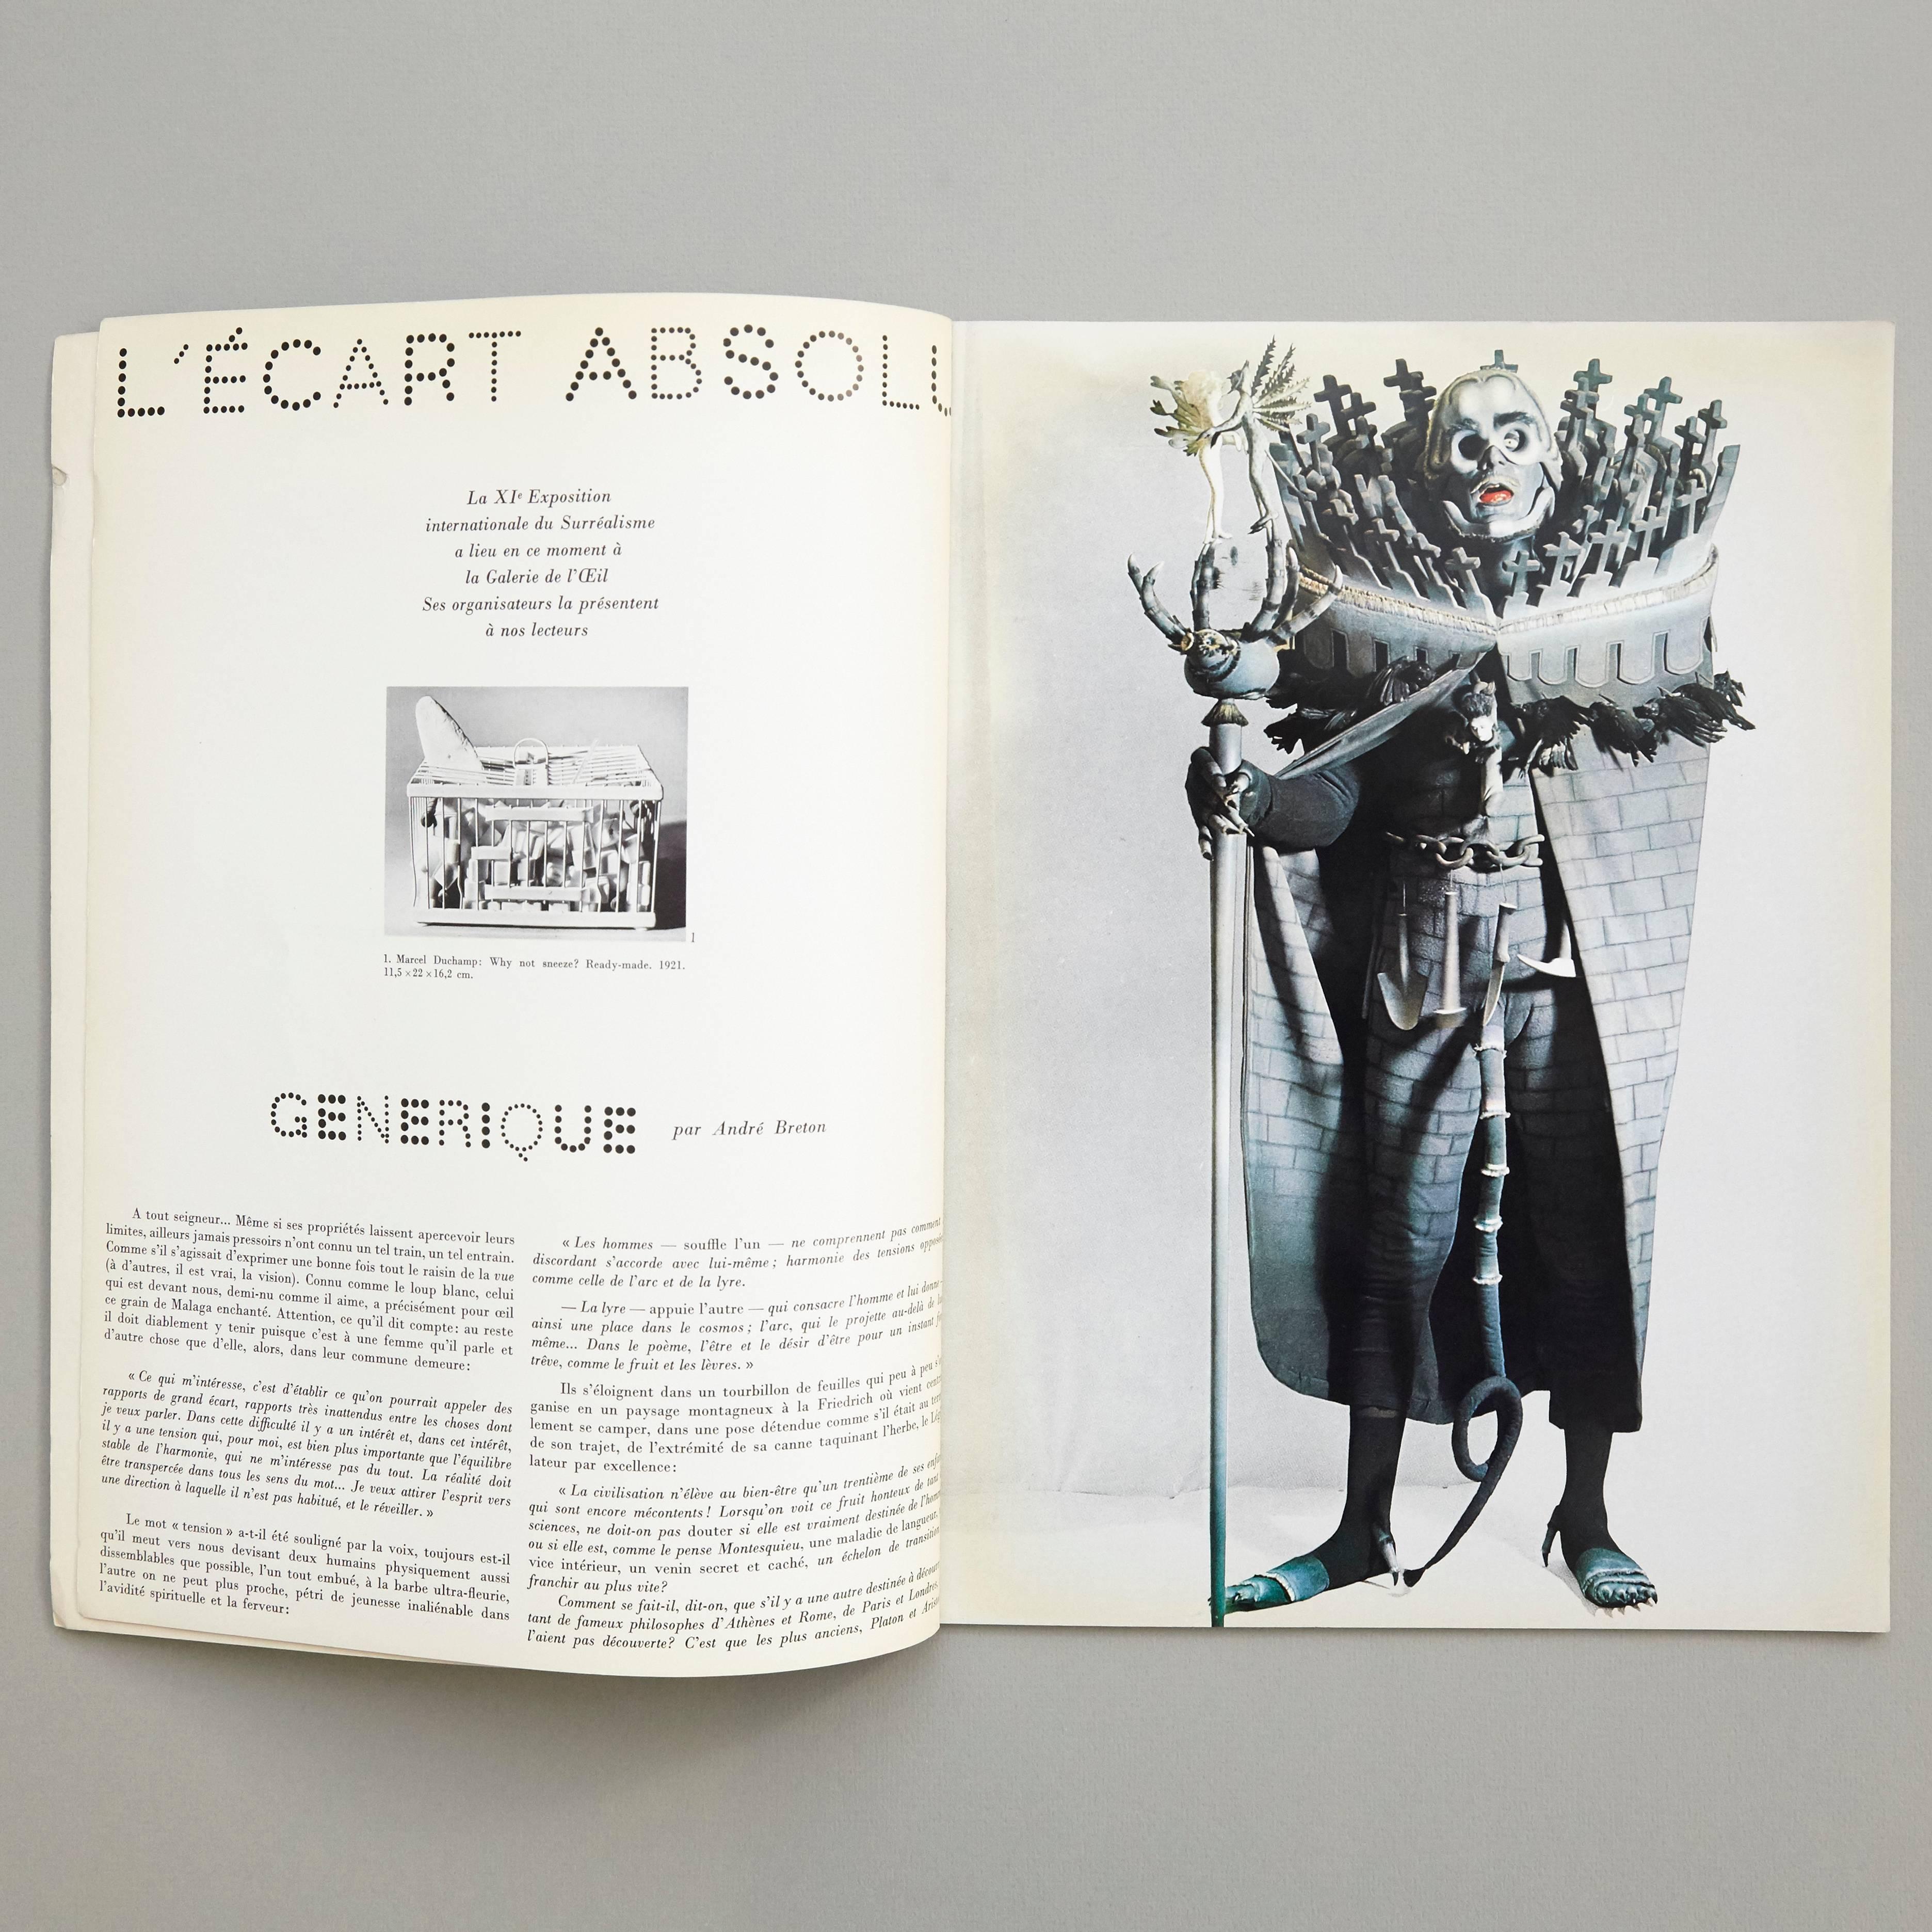 Catalogue of the exhibition 'L'Écart Absolu' that takes place at L'Oeil Gallery (Paris) in 1965.

First edition of this exhibition catalog, the 11th International Surrealism Exhibition, full of the 'Tranchons-en' flyer (not reproduced) and 3